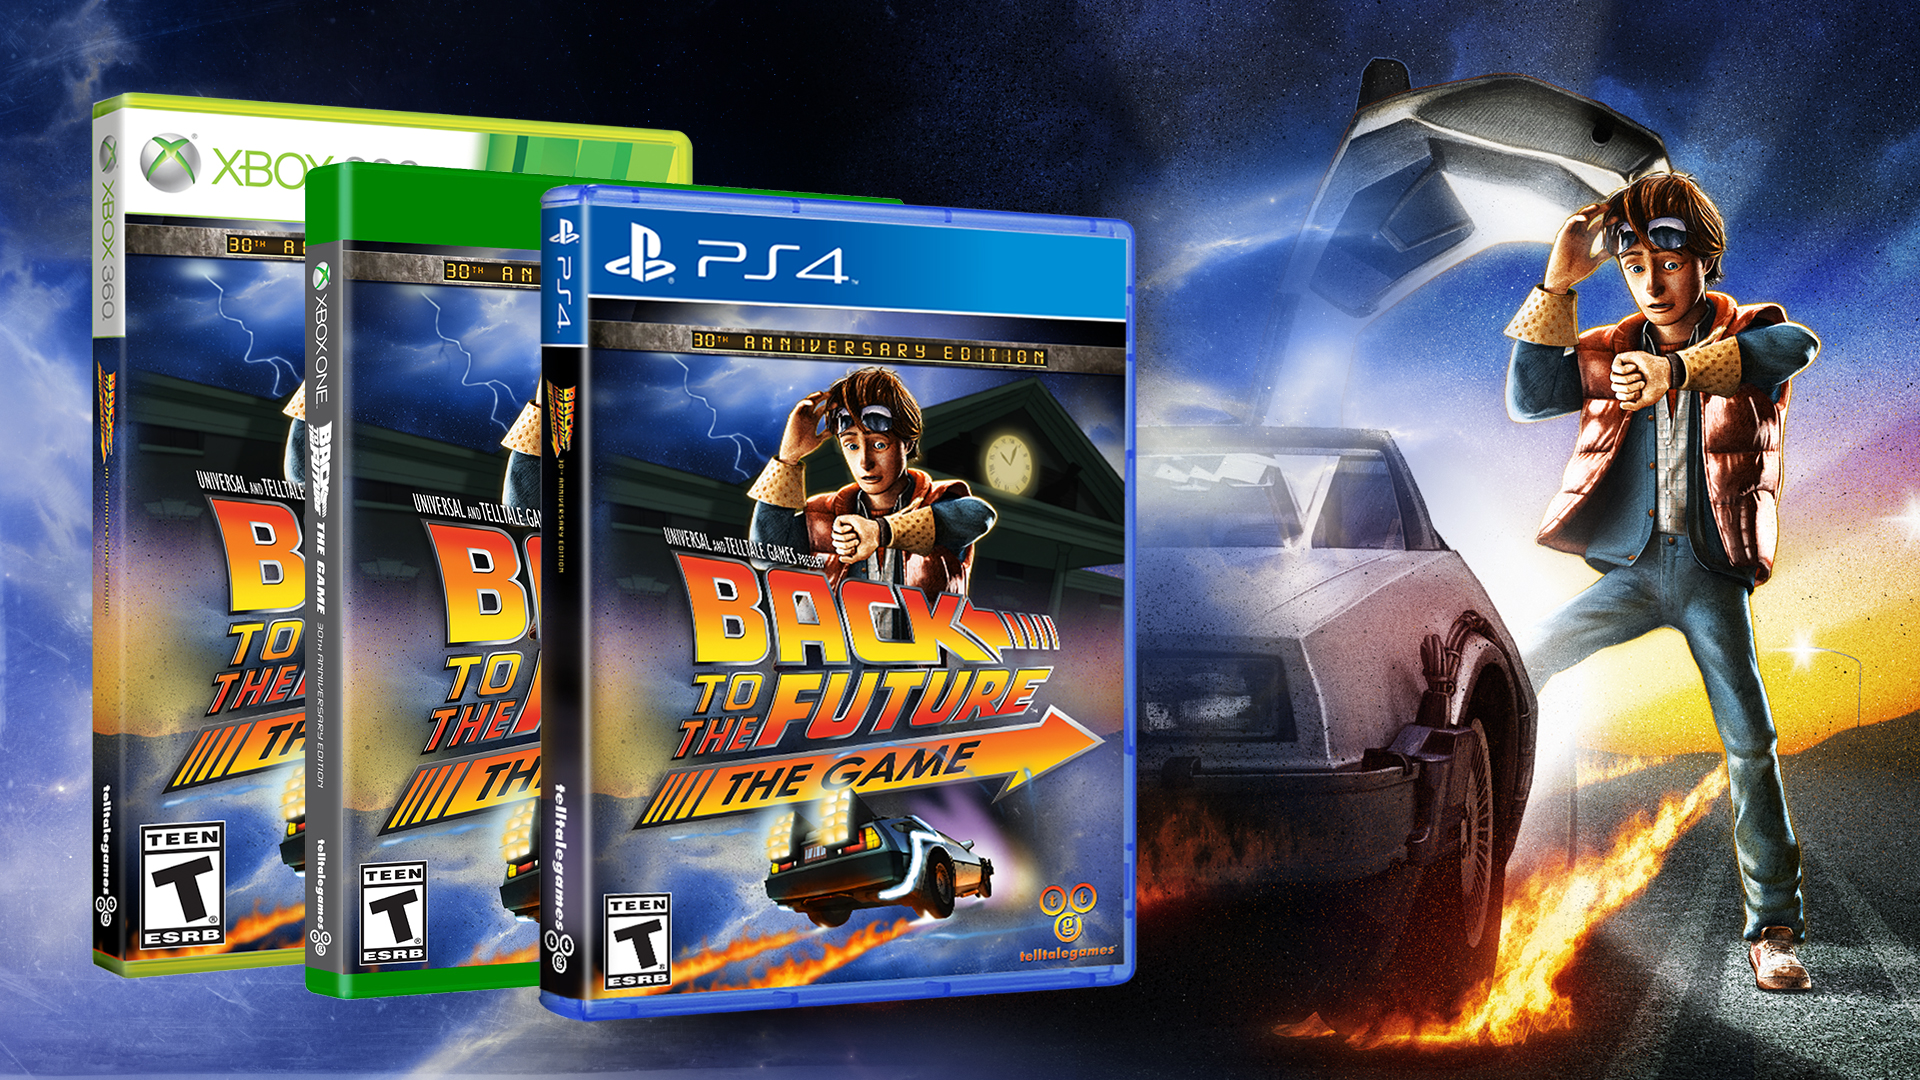 1 30 games. Back to the Future игра. Ps3 back to the Future: the game. Back to the Future the game ps4. Telltale back to the Future.